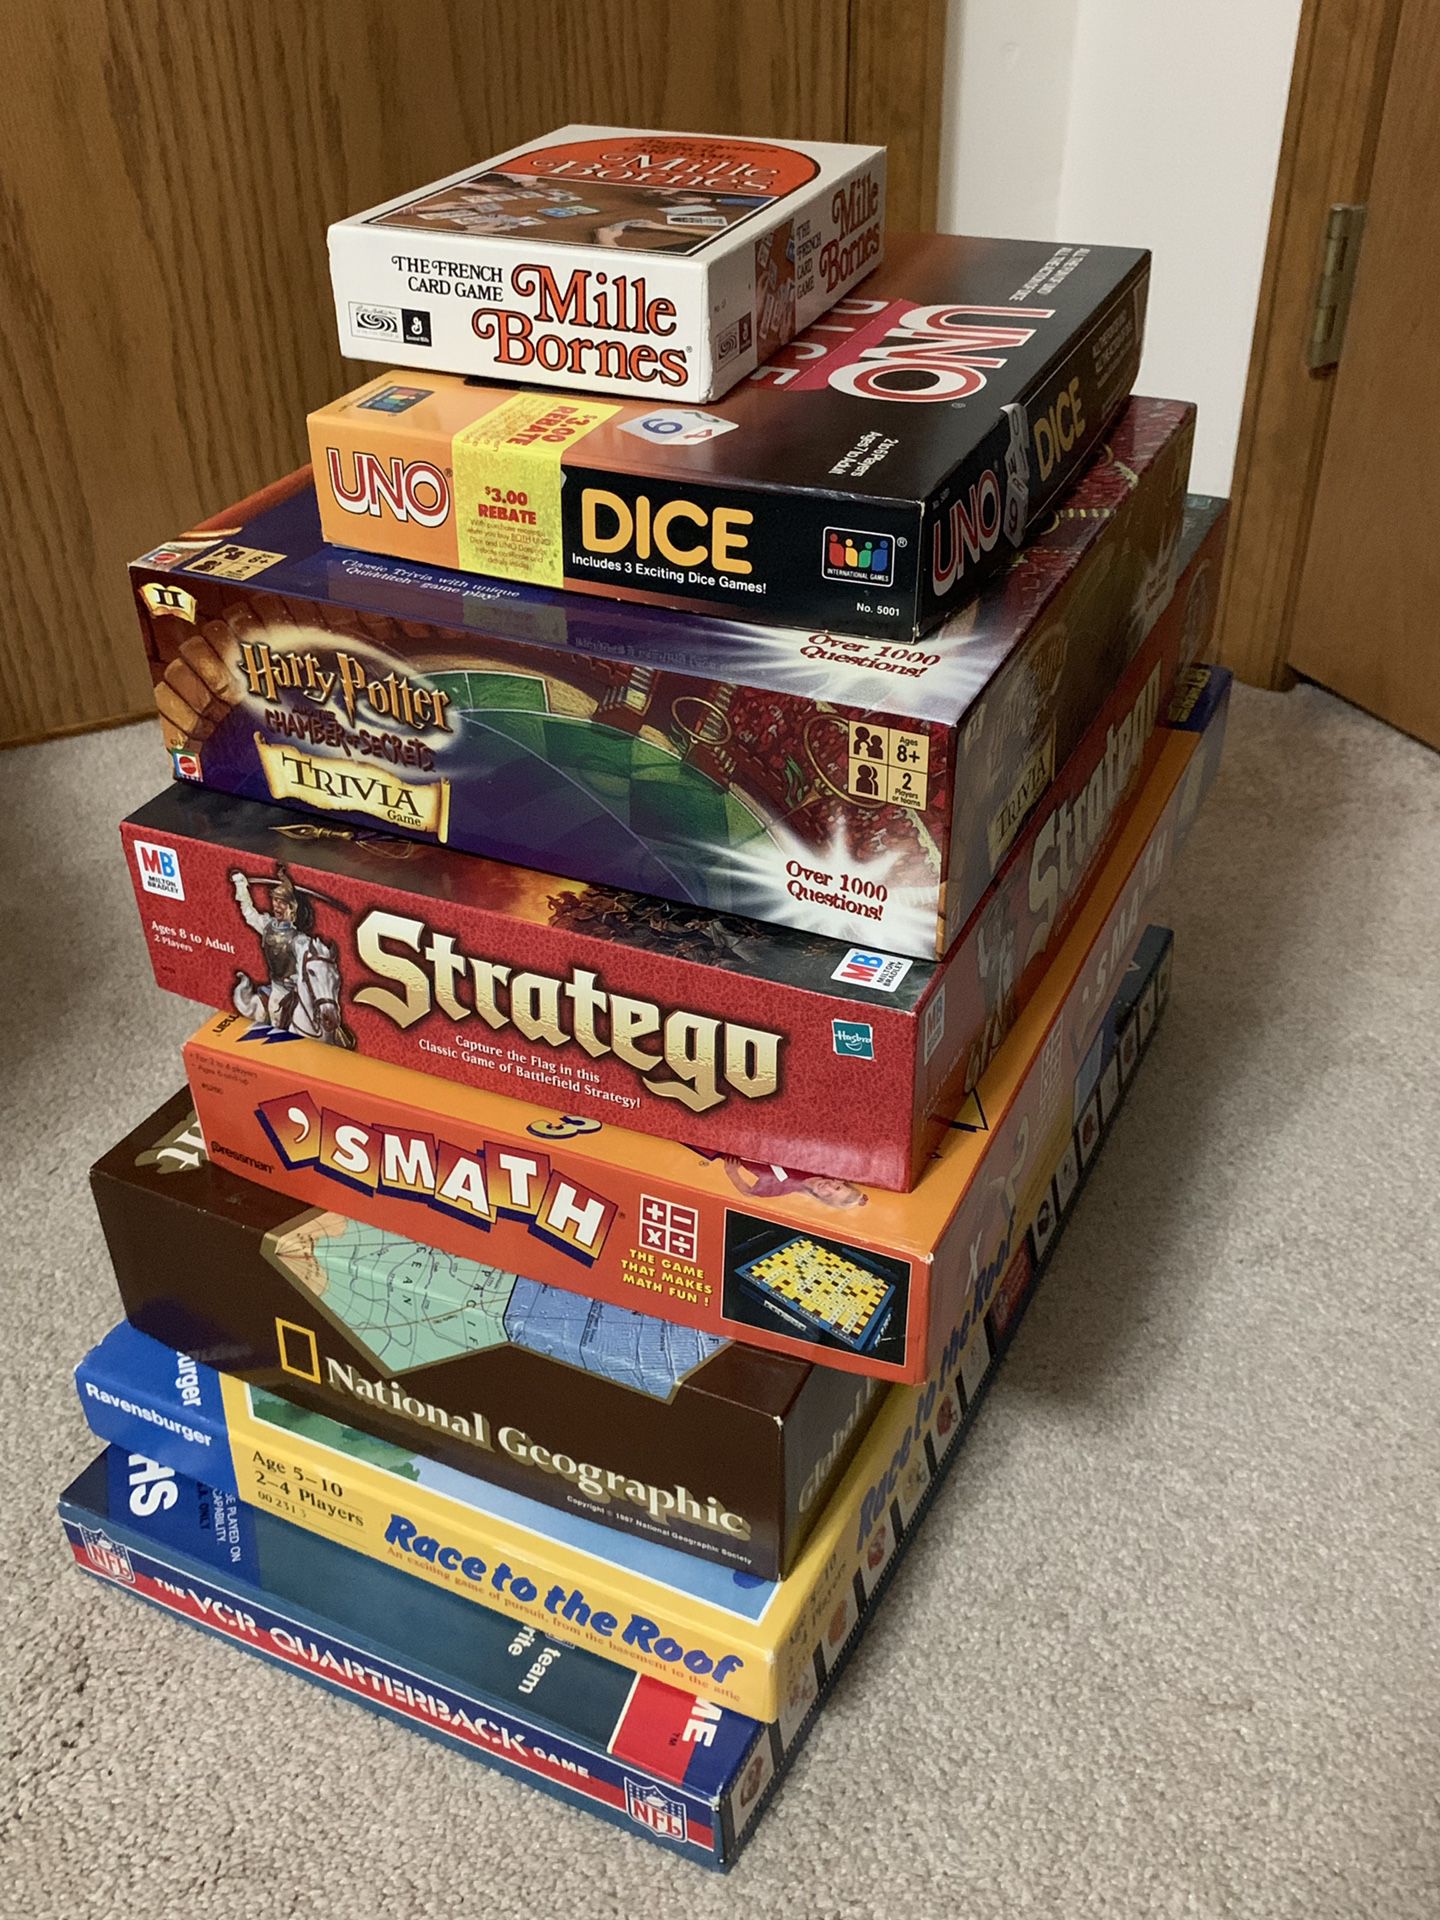 Board games and puzzles